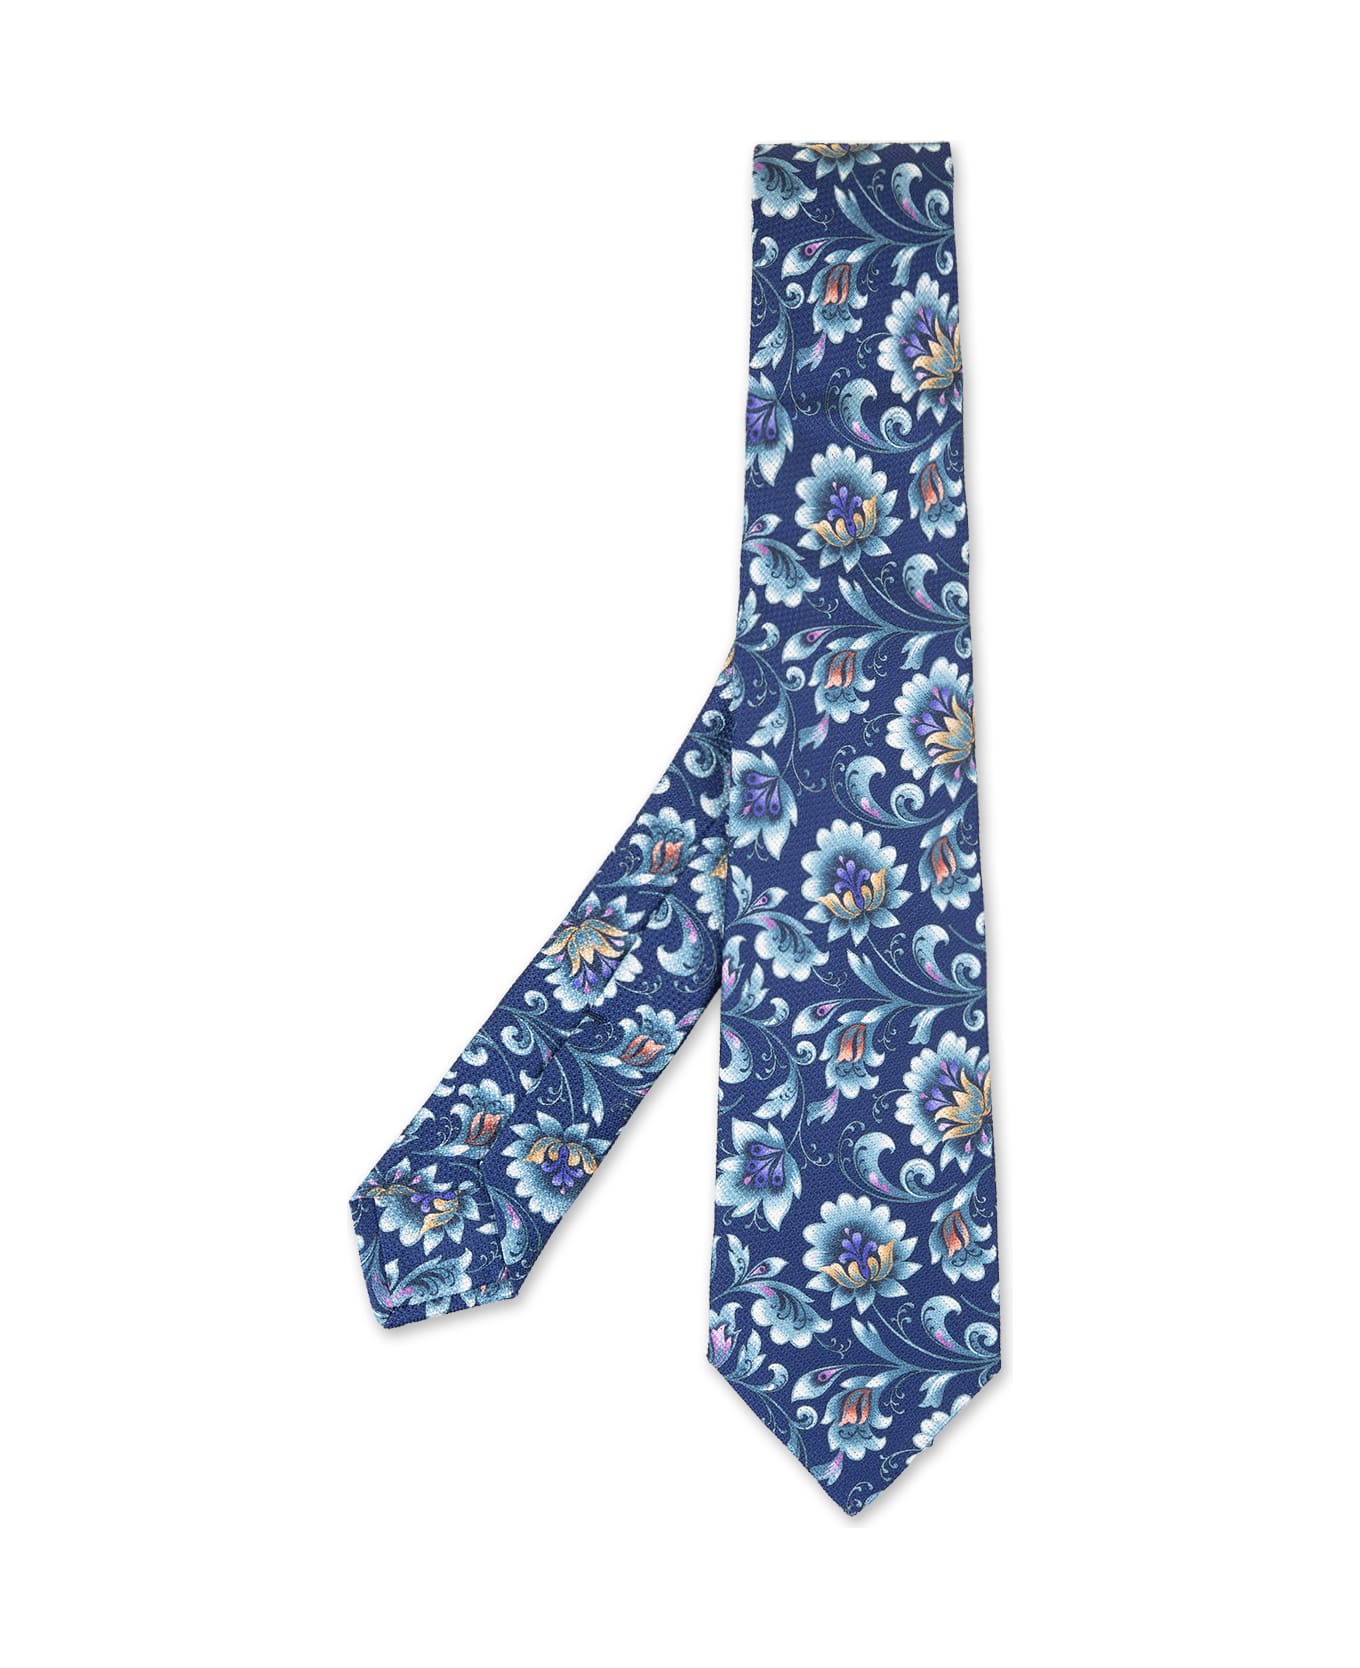 Kiton Blue Tie With Floral Print - Blue